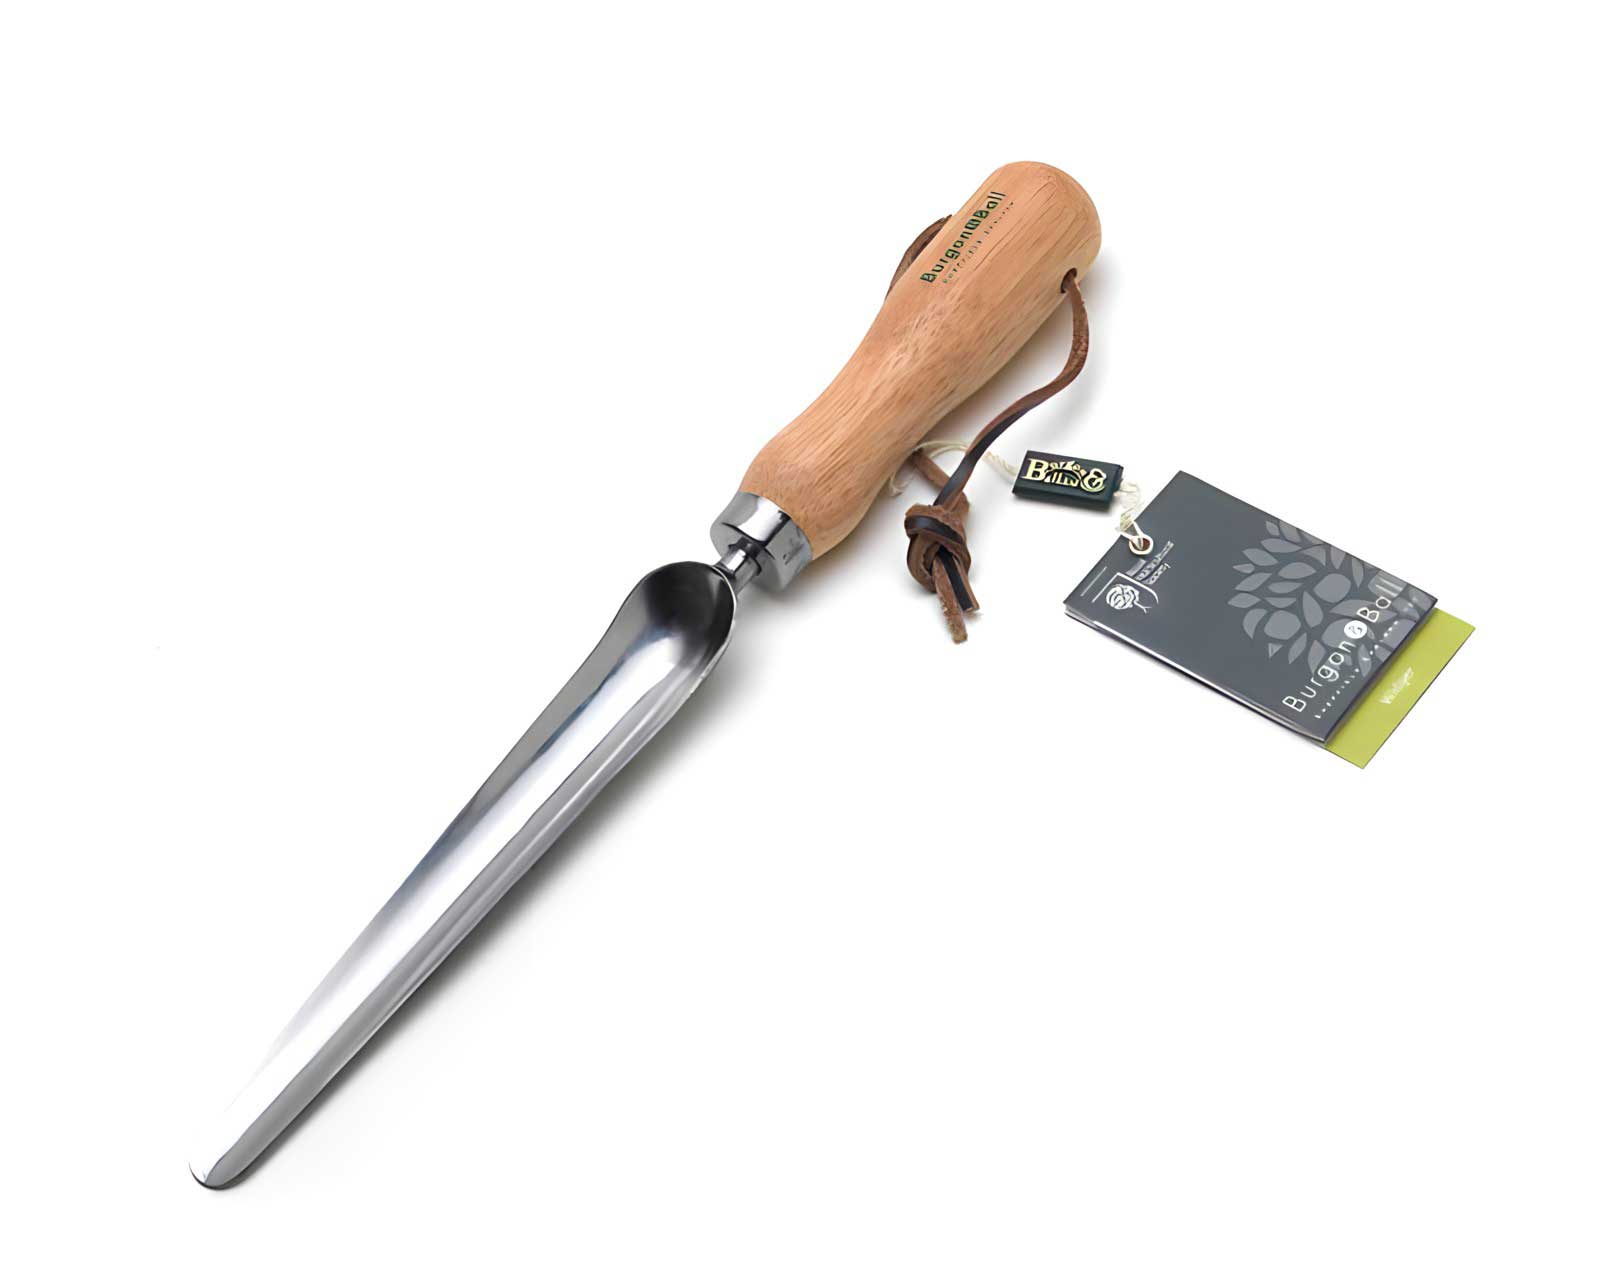 Stainless steel Widger - part of the Classic Hand Tool range from Burgon & Ball